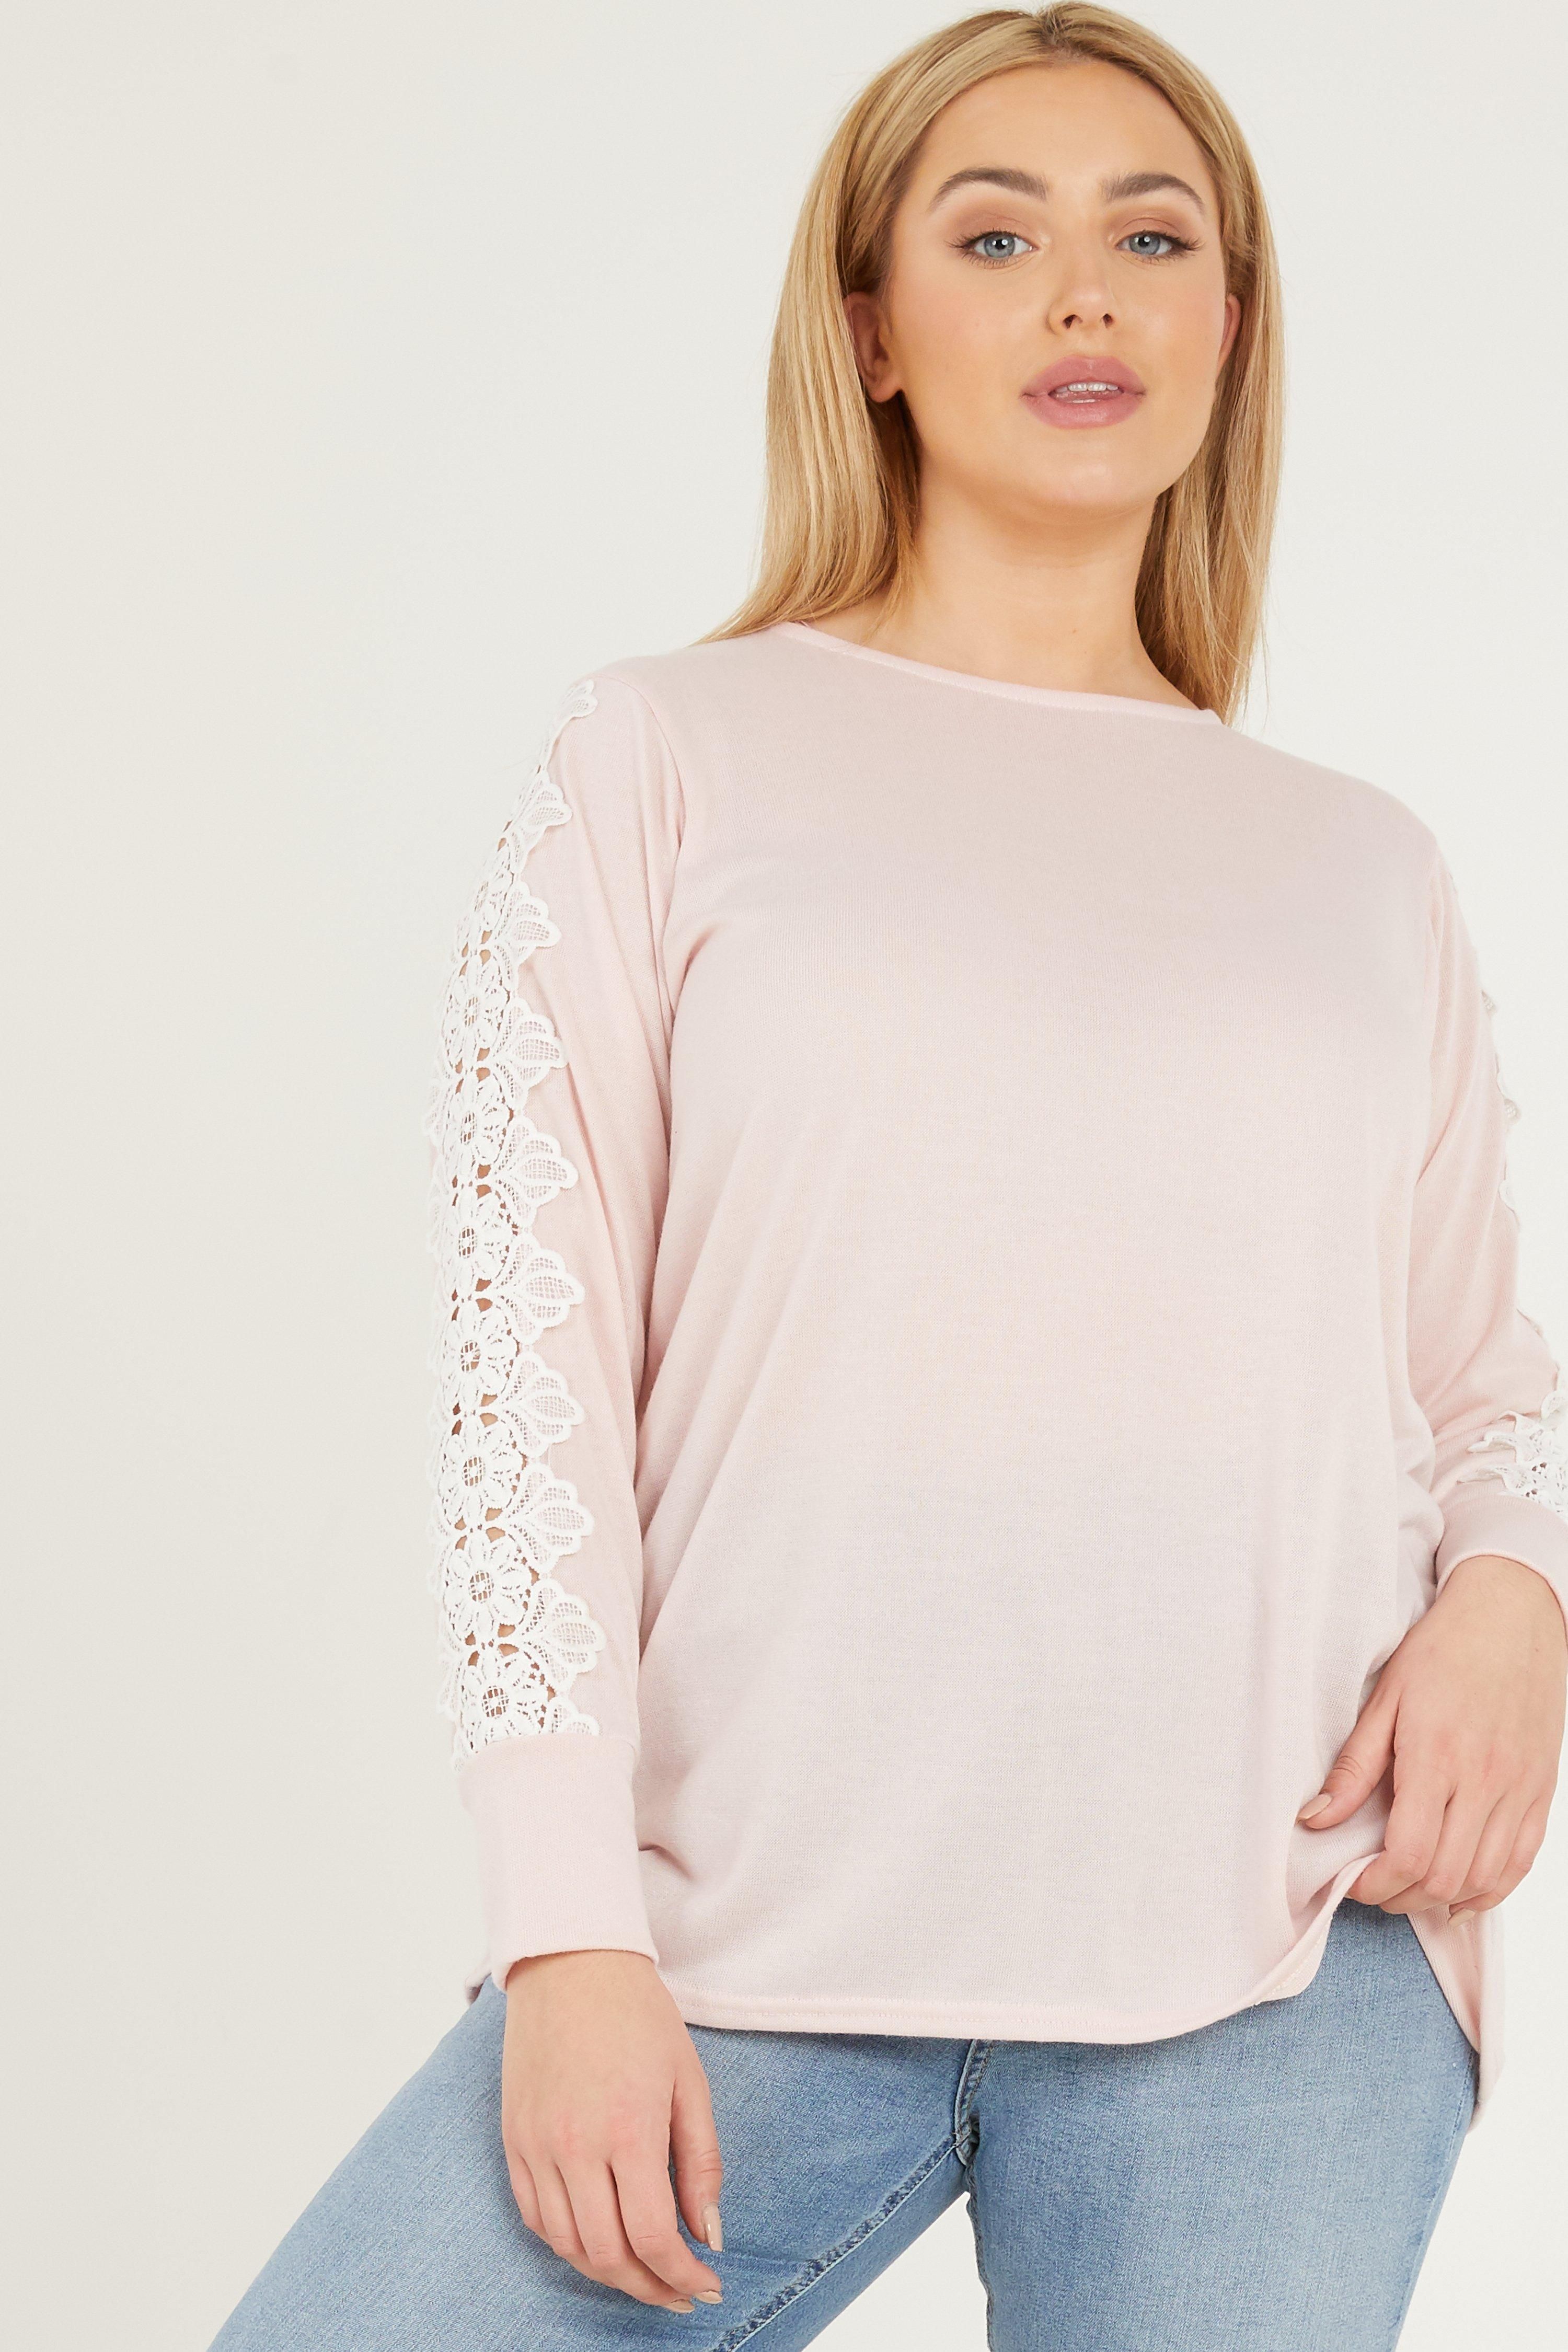 - Curve collection   - Light knit   - Crochet detail   - Round neck   - Long sleeve  - Length: 65cm approx